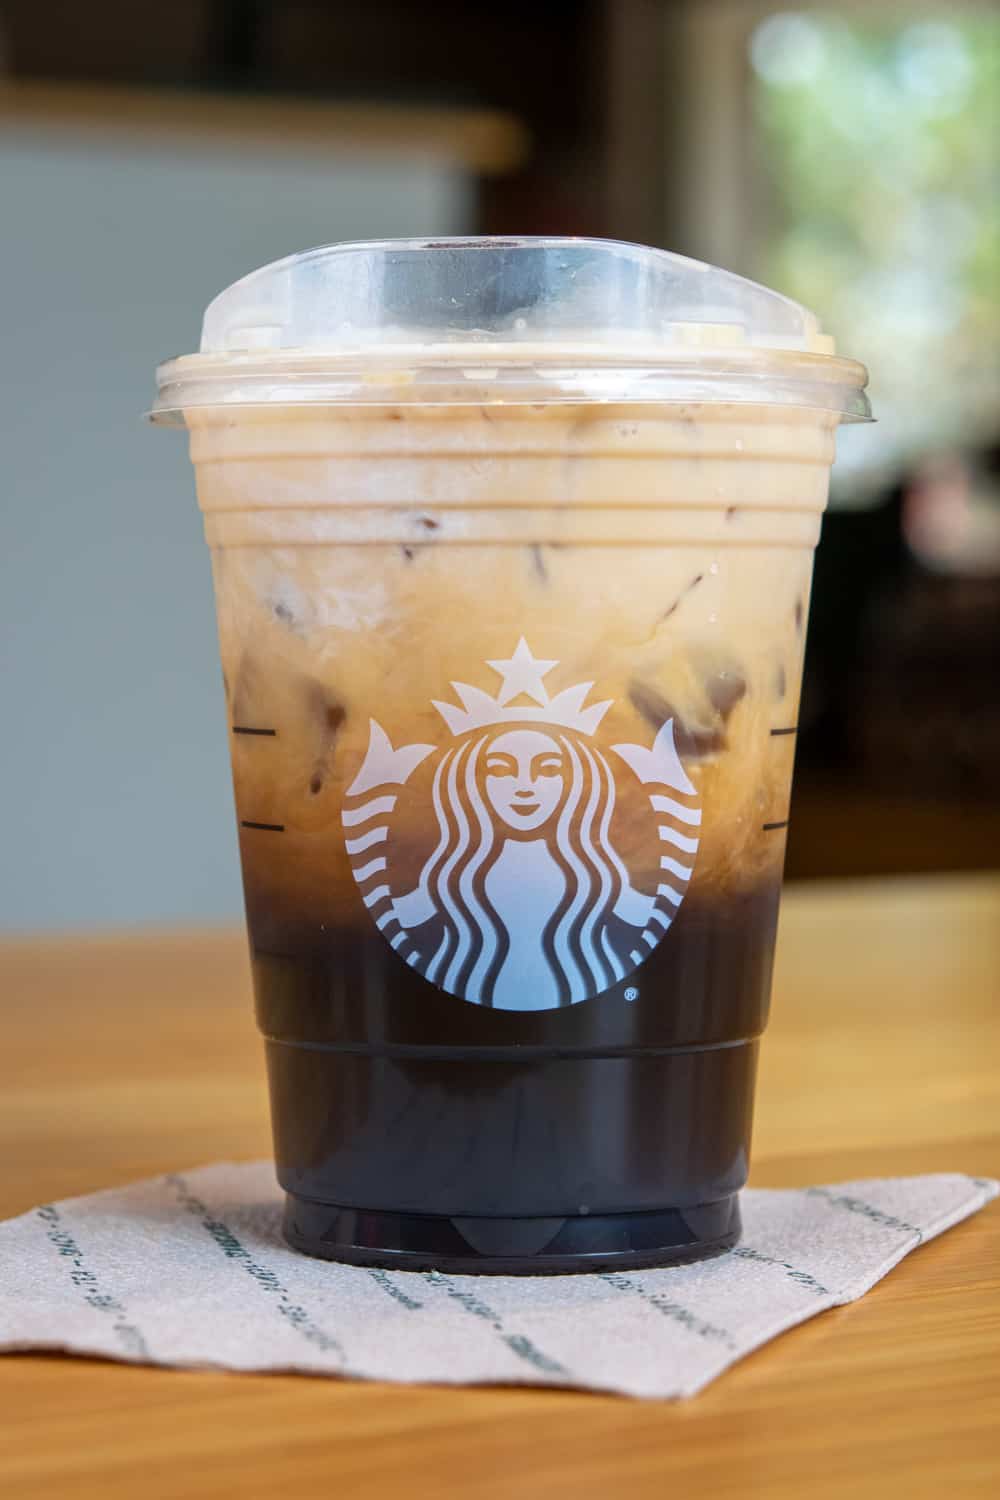 Best Starbucks Iced Coffee: Top 10 Drinks » Grounds to Brew